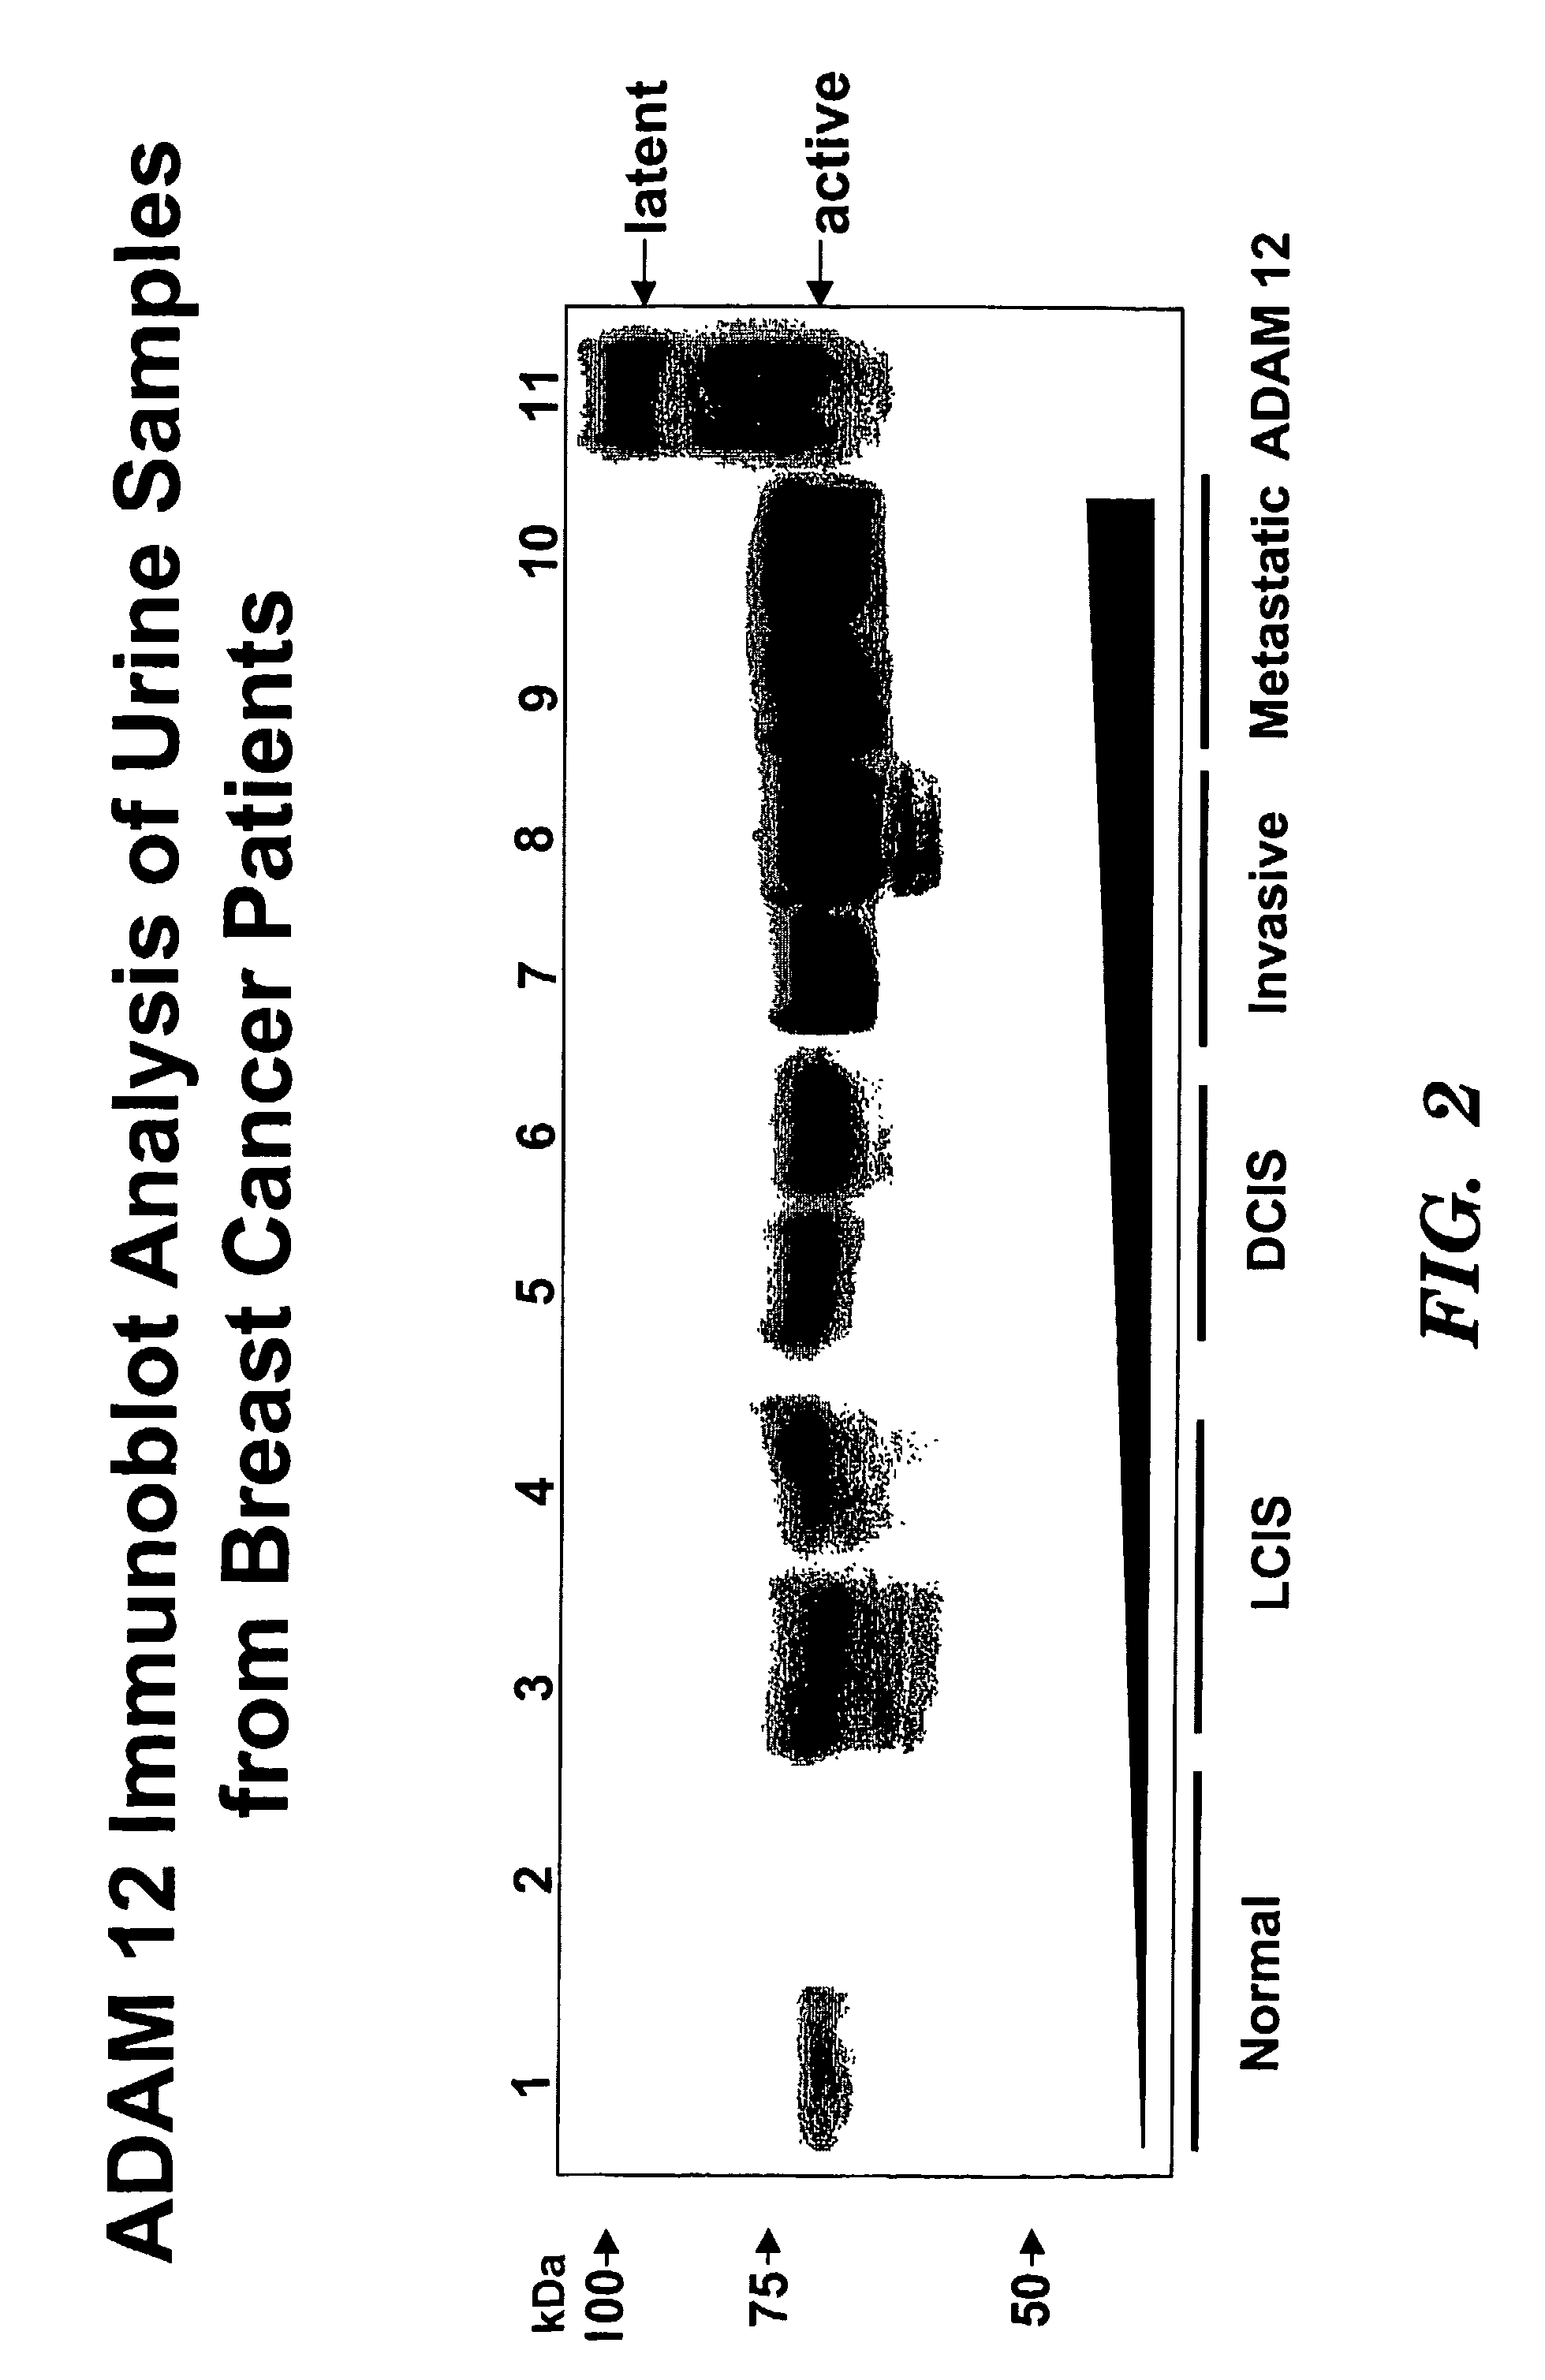 Methods for diagnosis and prognosis of cancers of epithelial origin